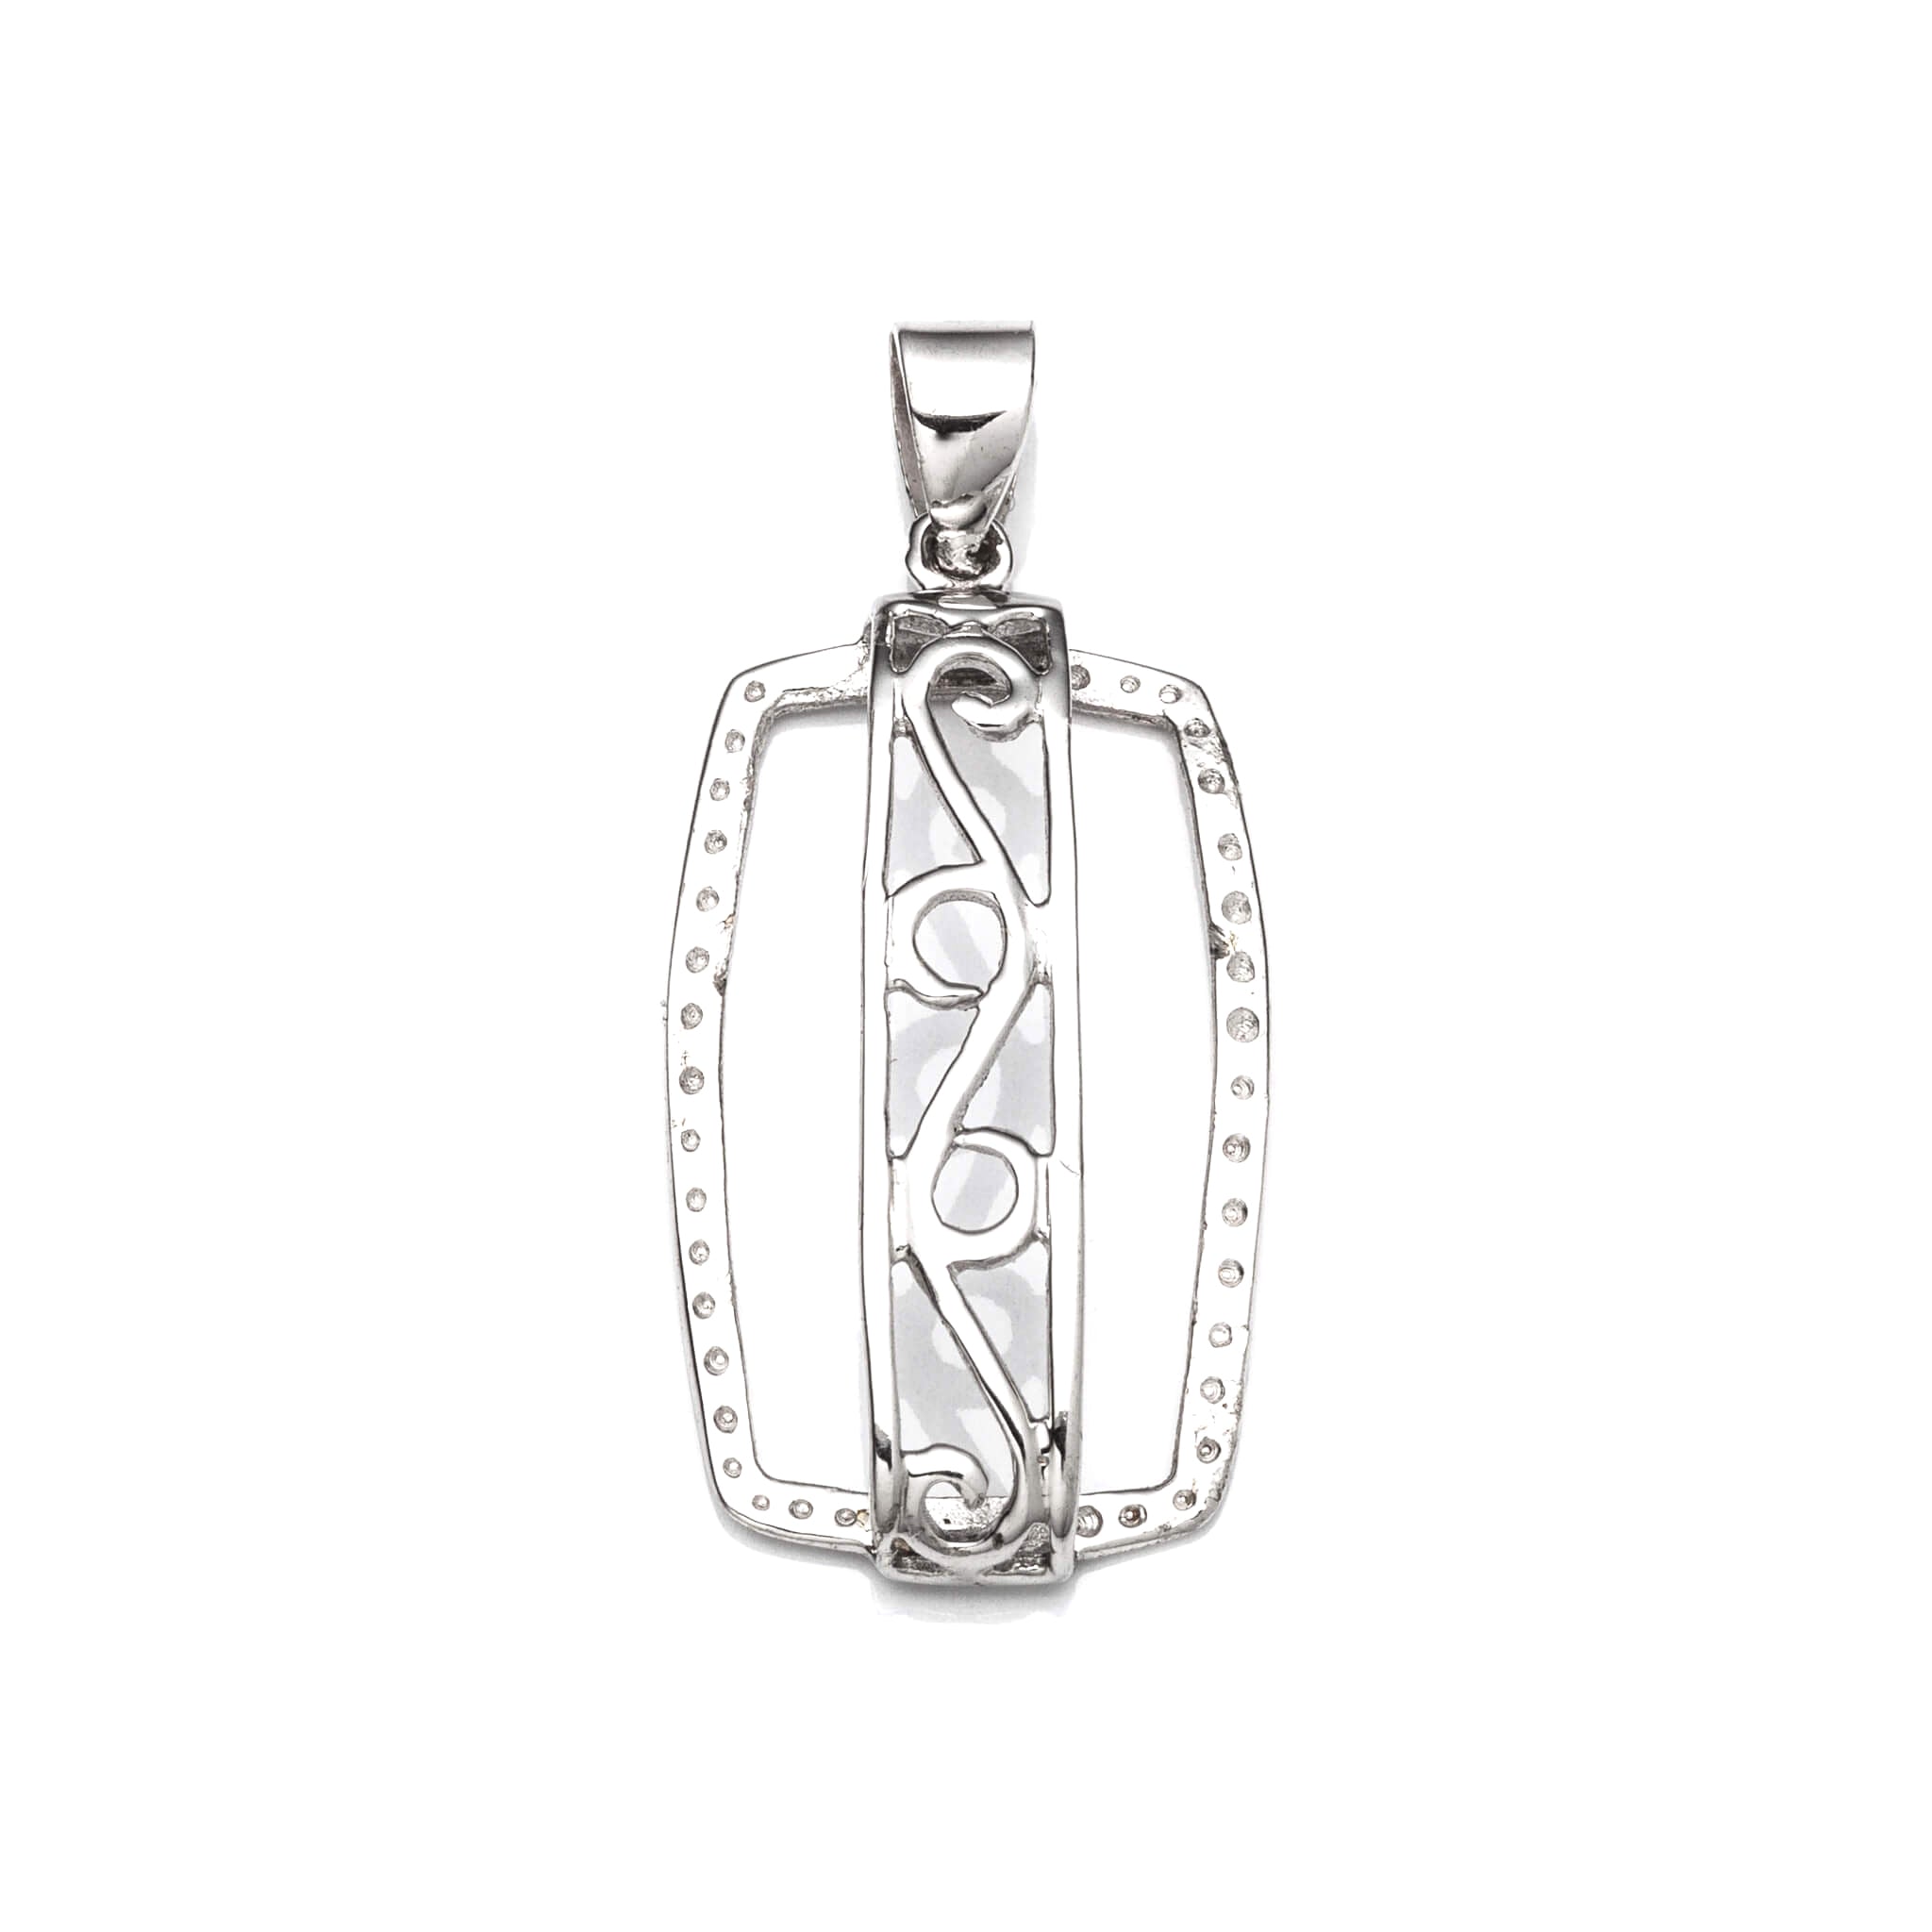 Rectangular Pendant with Rectangular Bezel Mounting and Bail in Sterling Silver 15x24mm